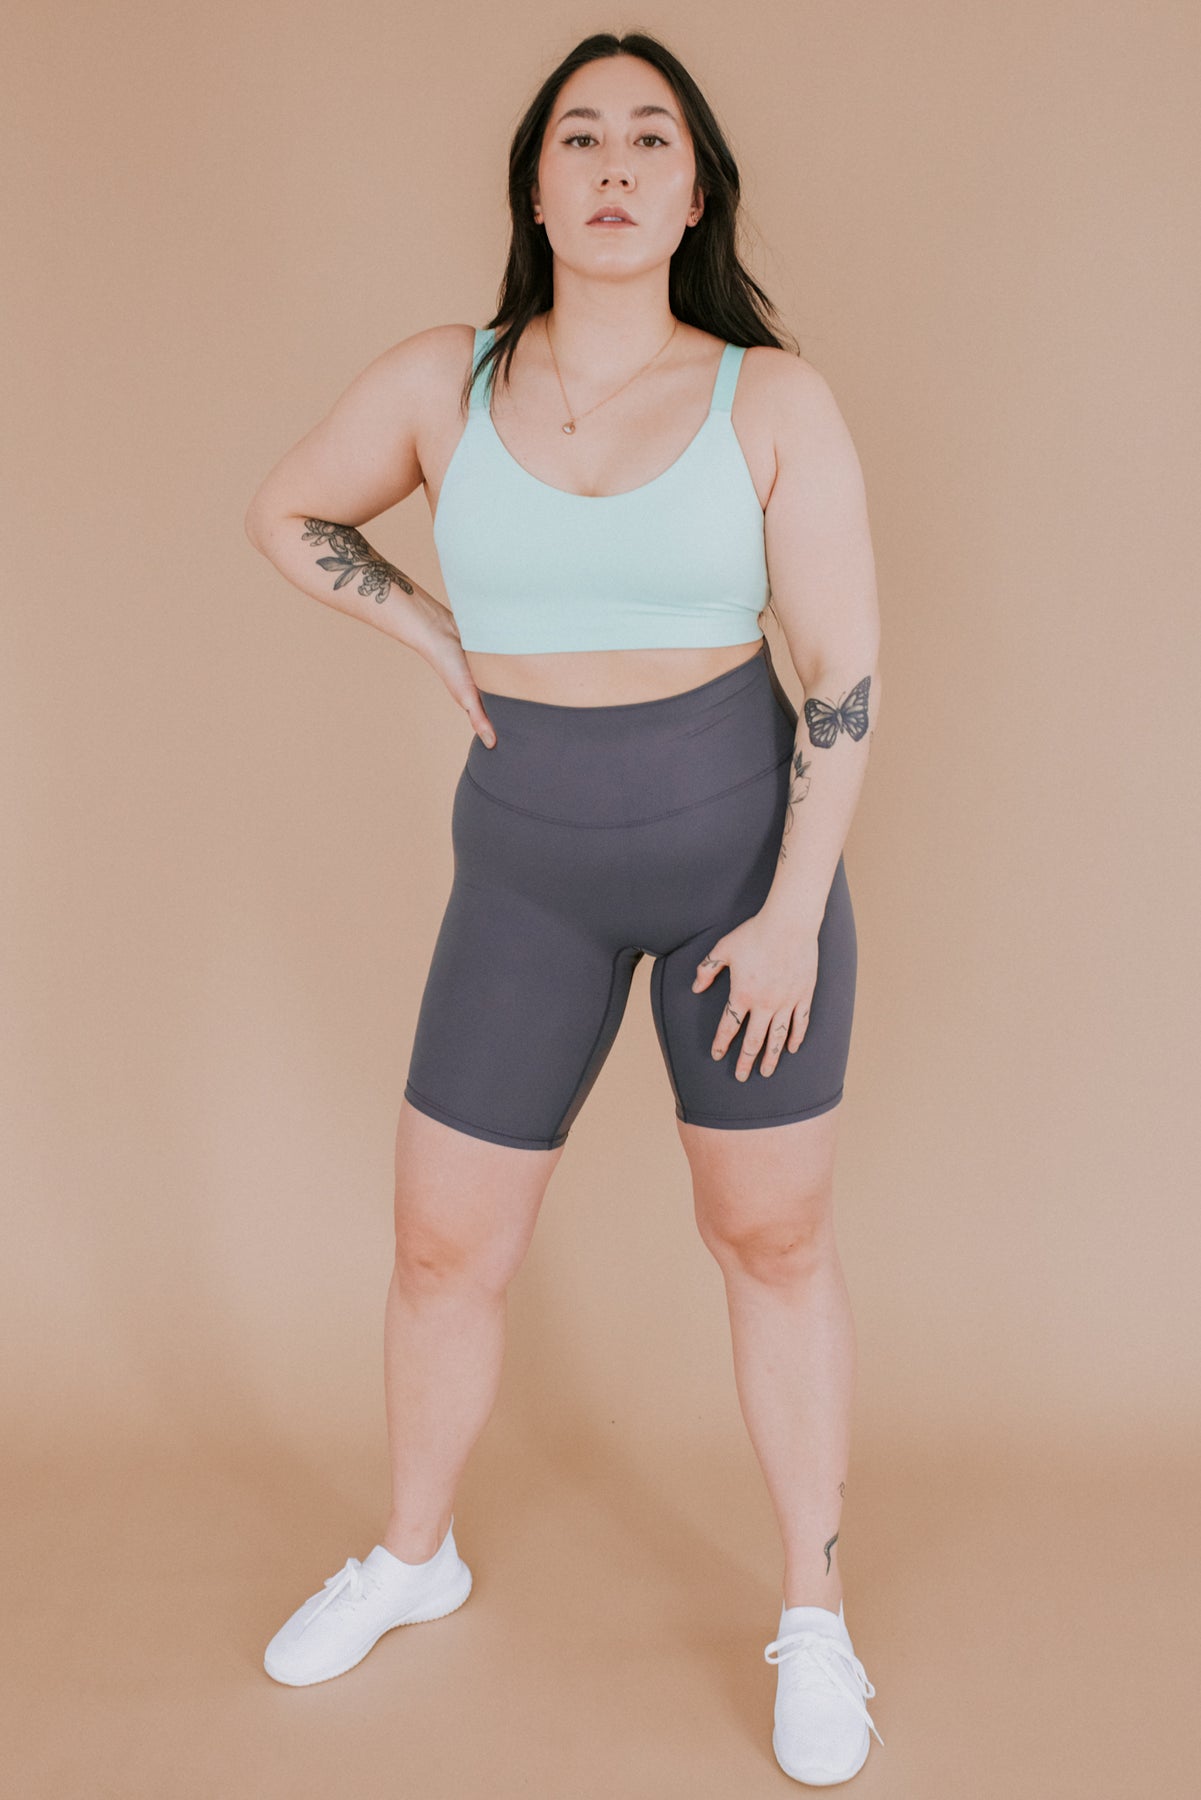 Plus Size Barely There Shorts